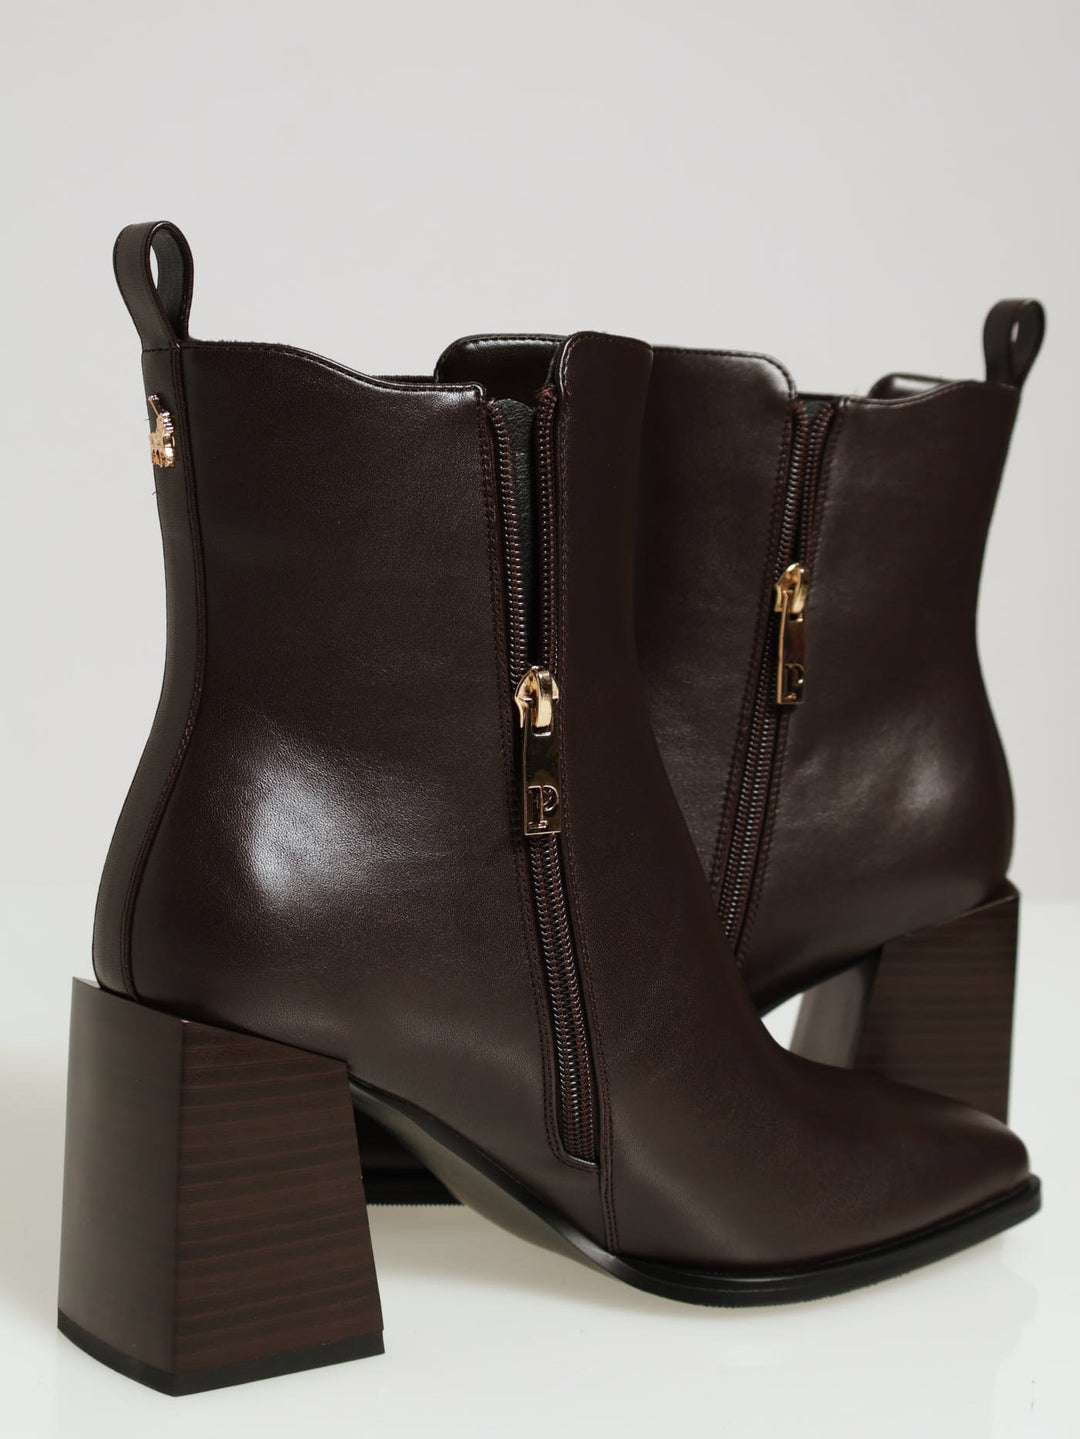 Chelsea Block Square Toe Ankle Boot - Brown